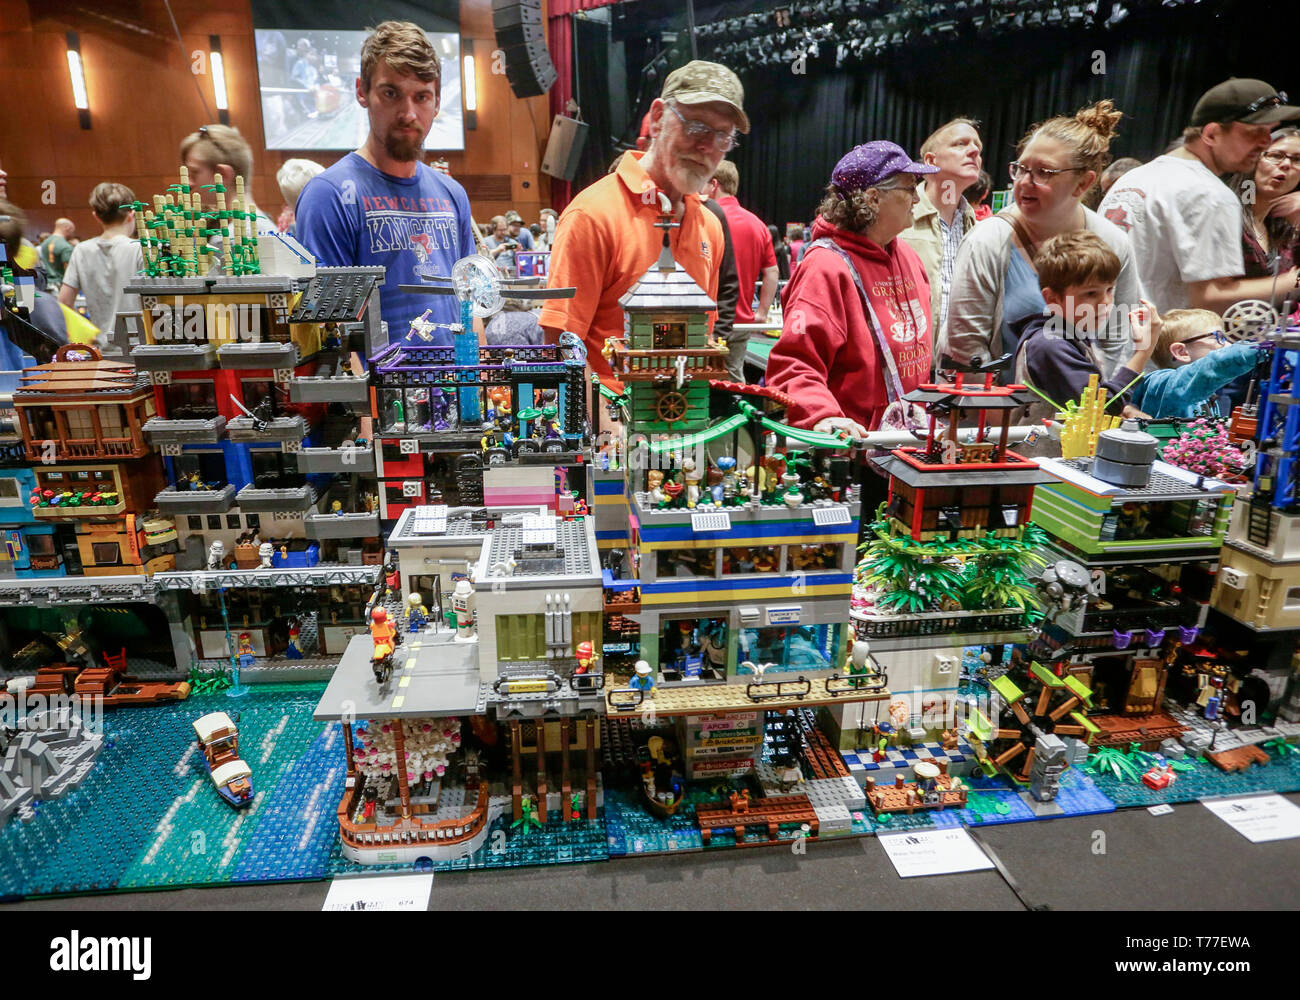 Richmond, Canada. 04th May, 2019. People look at LEGO models during the annual BrickCan convention River Rock Theater in Richmond, Canada, May 4, 2019. As one of Canada's largest LEGO conventions,